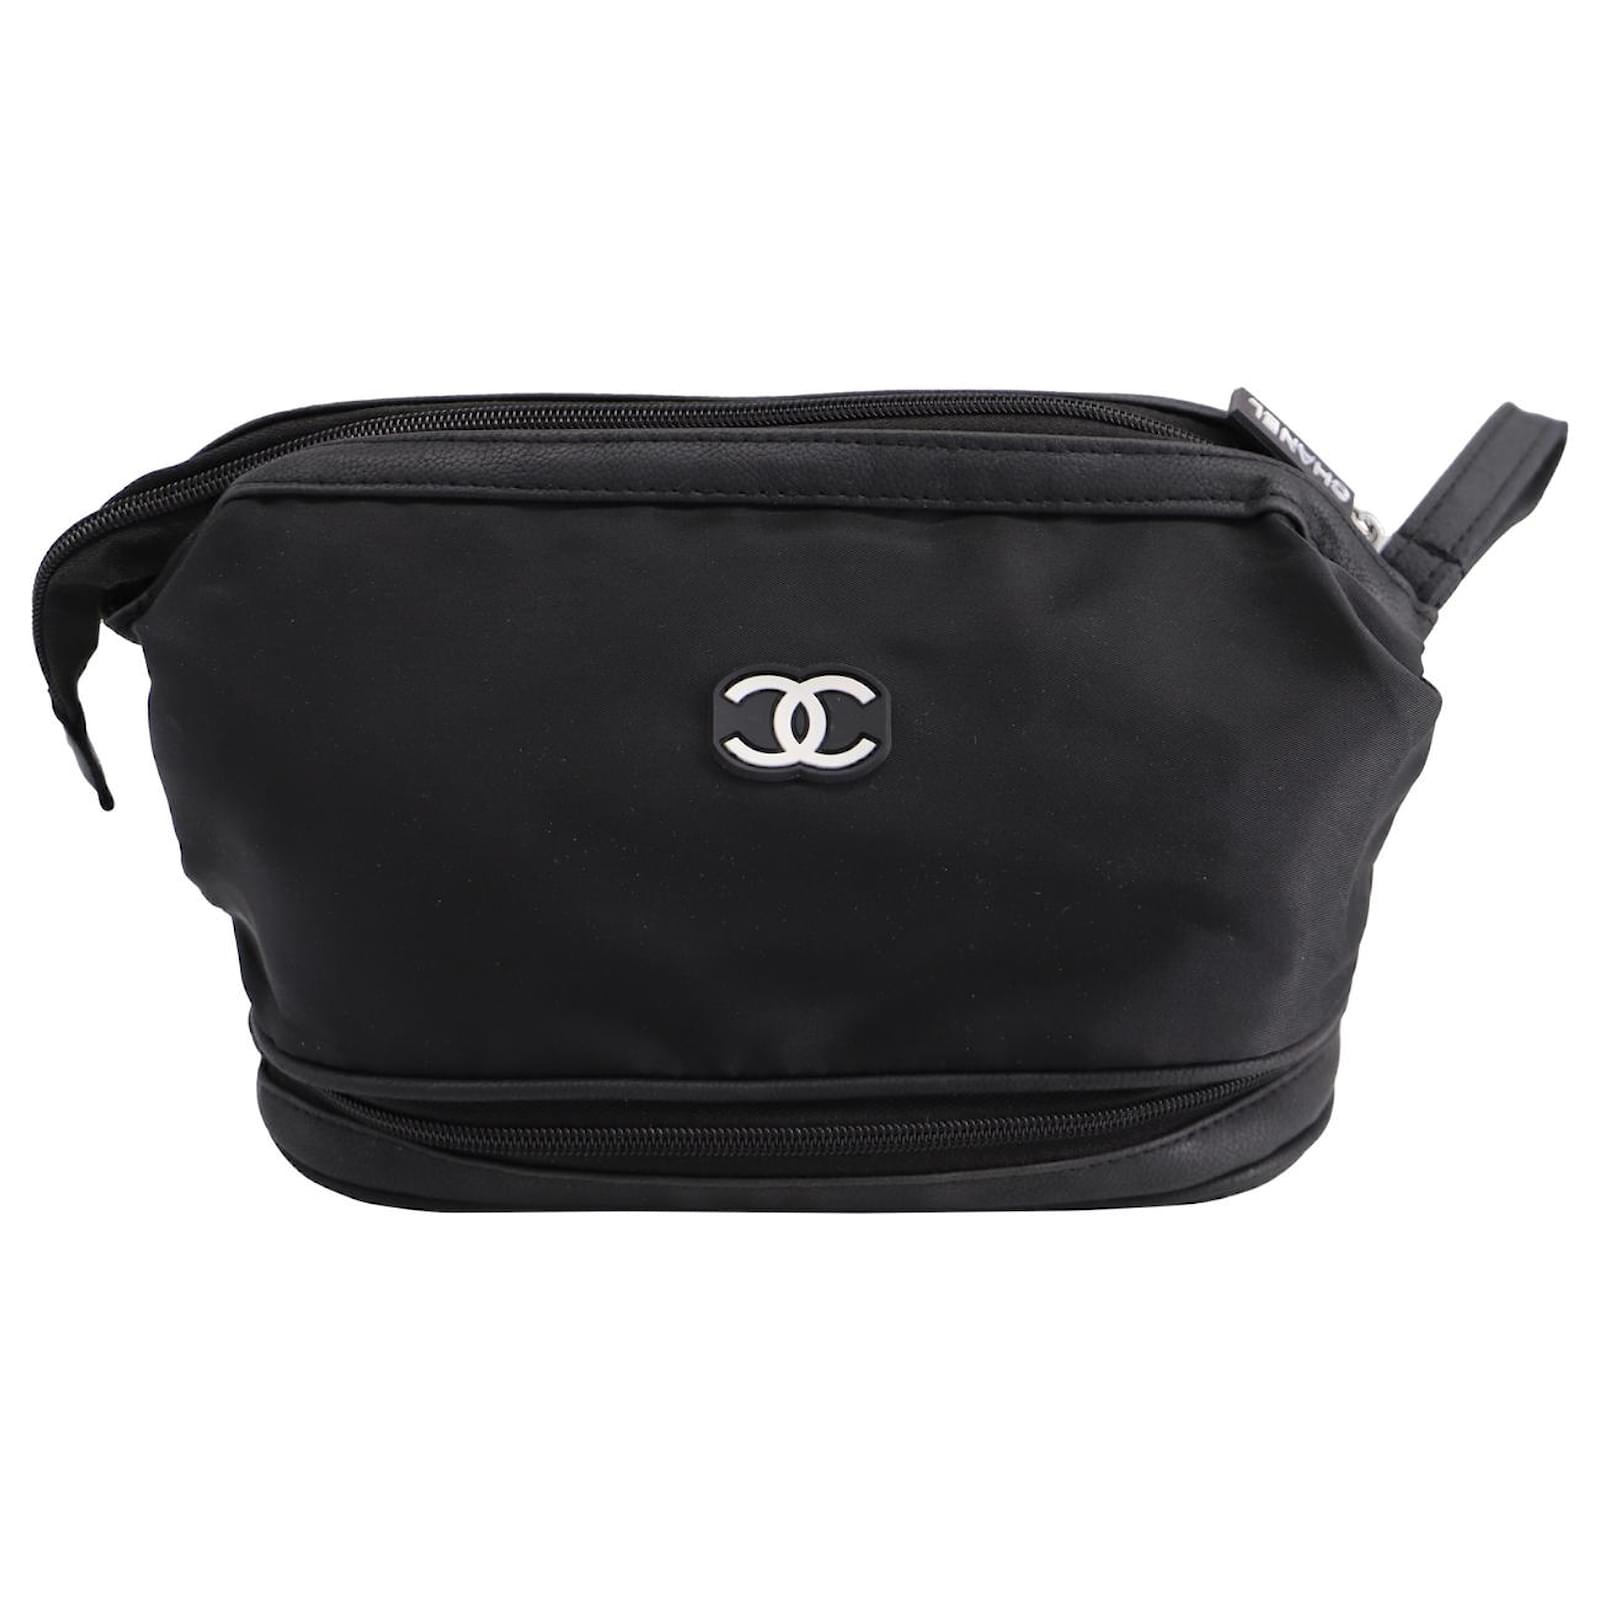 Chanel Cosmetic Pouch in Black Leather